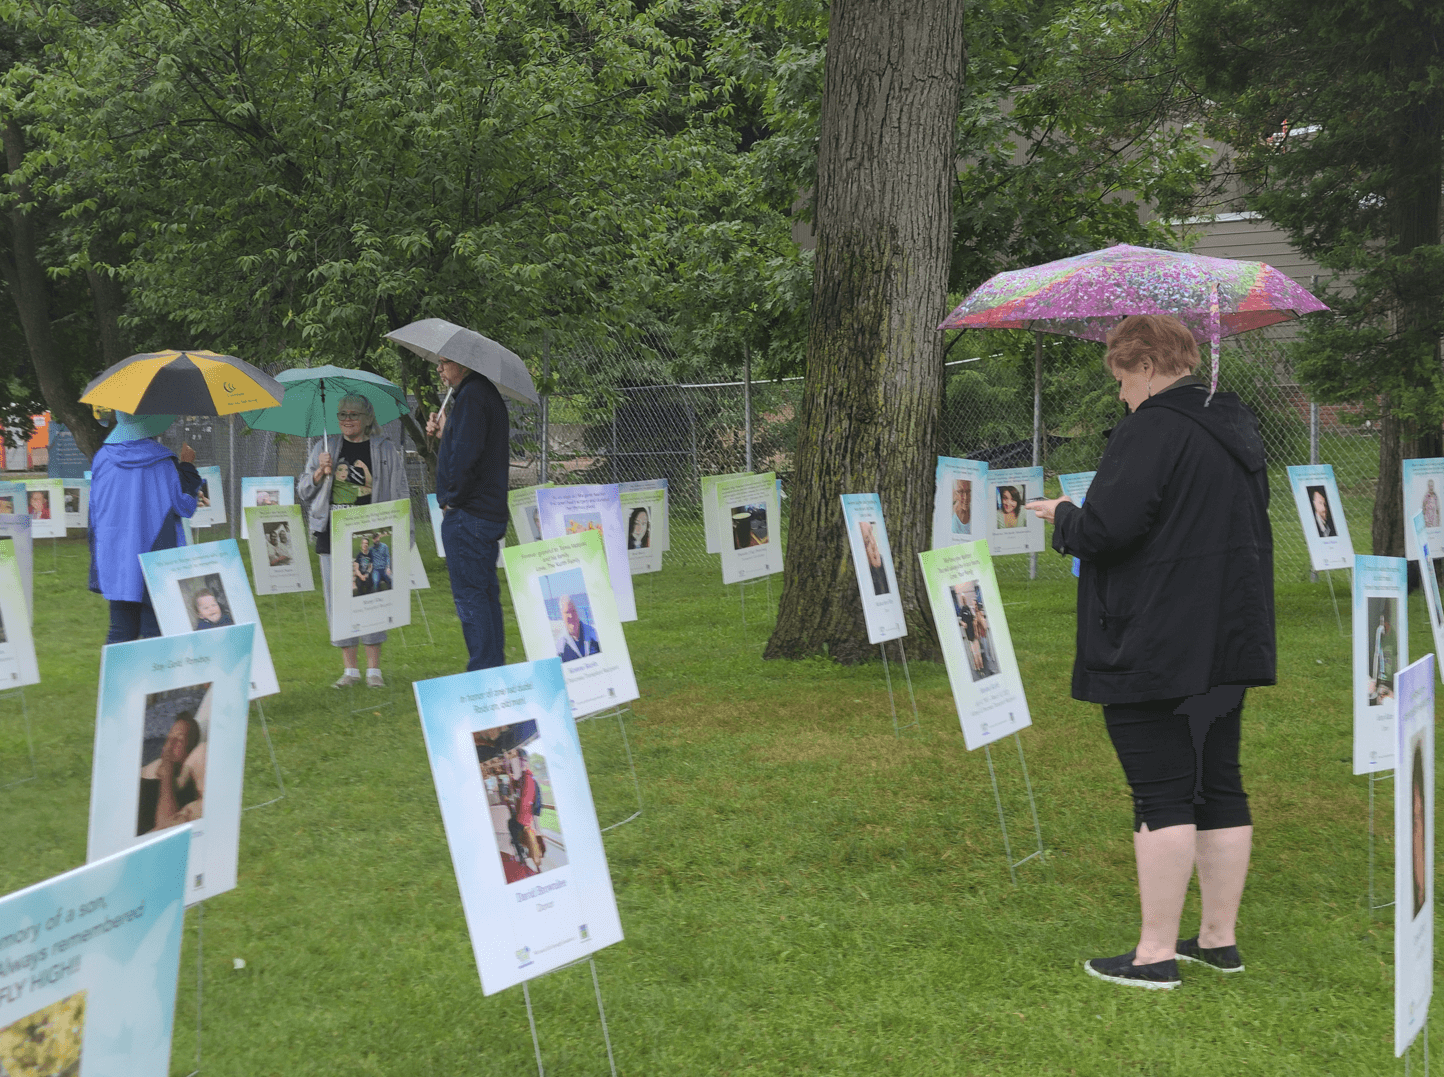 People gather in the rain under umbrellas, looking at poster yard signs with photos of those touched by organ donation and transplant